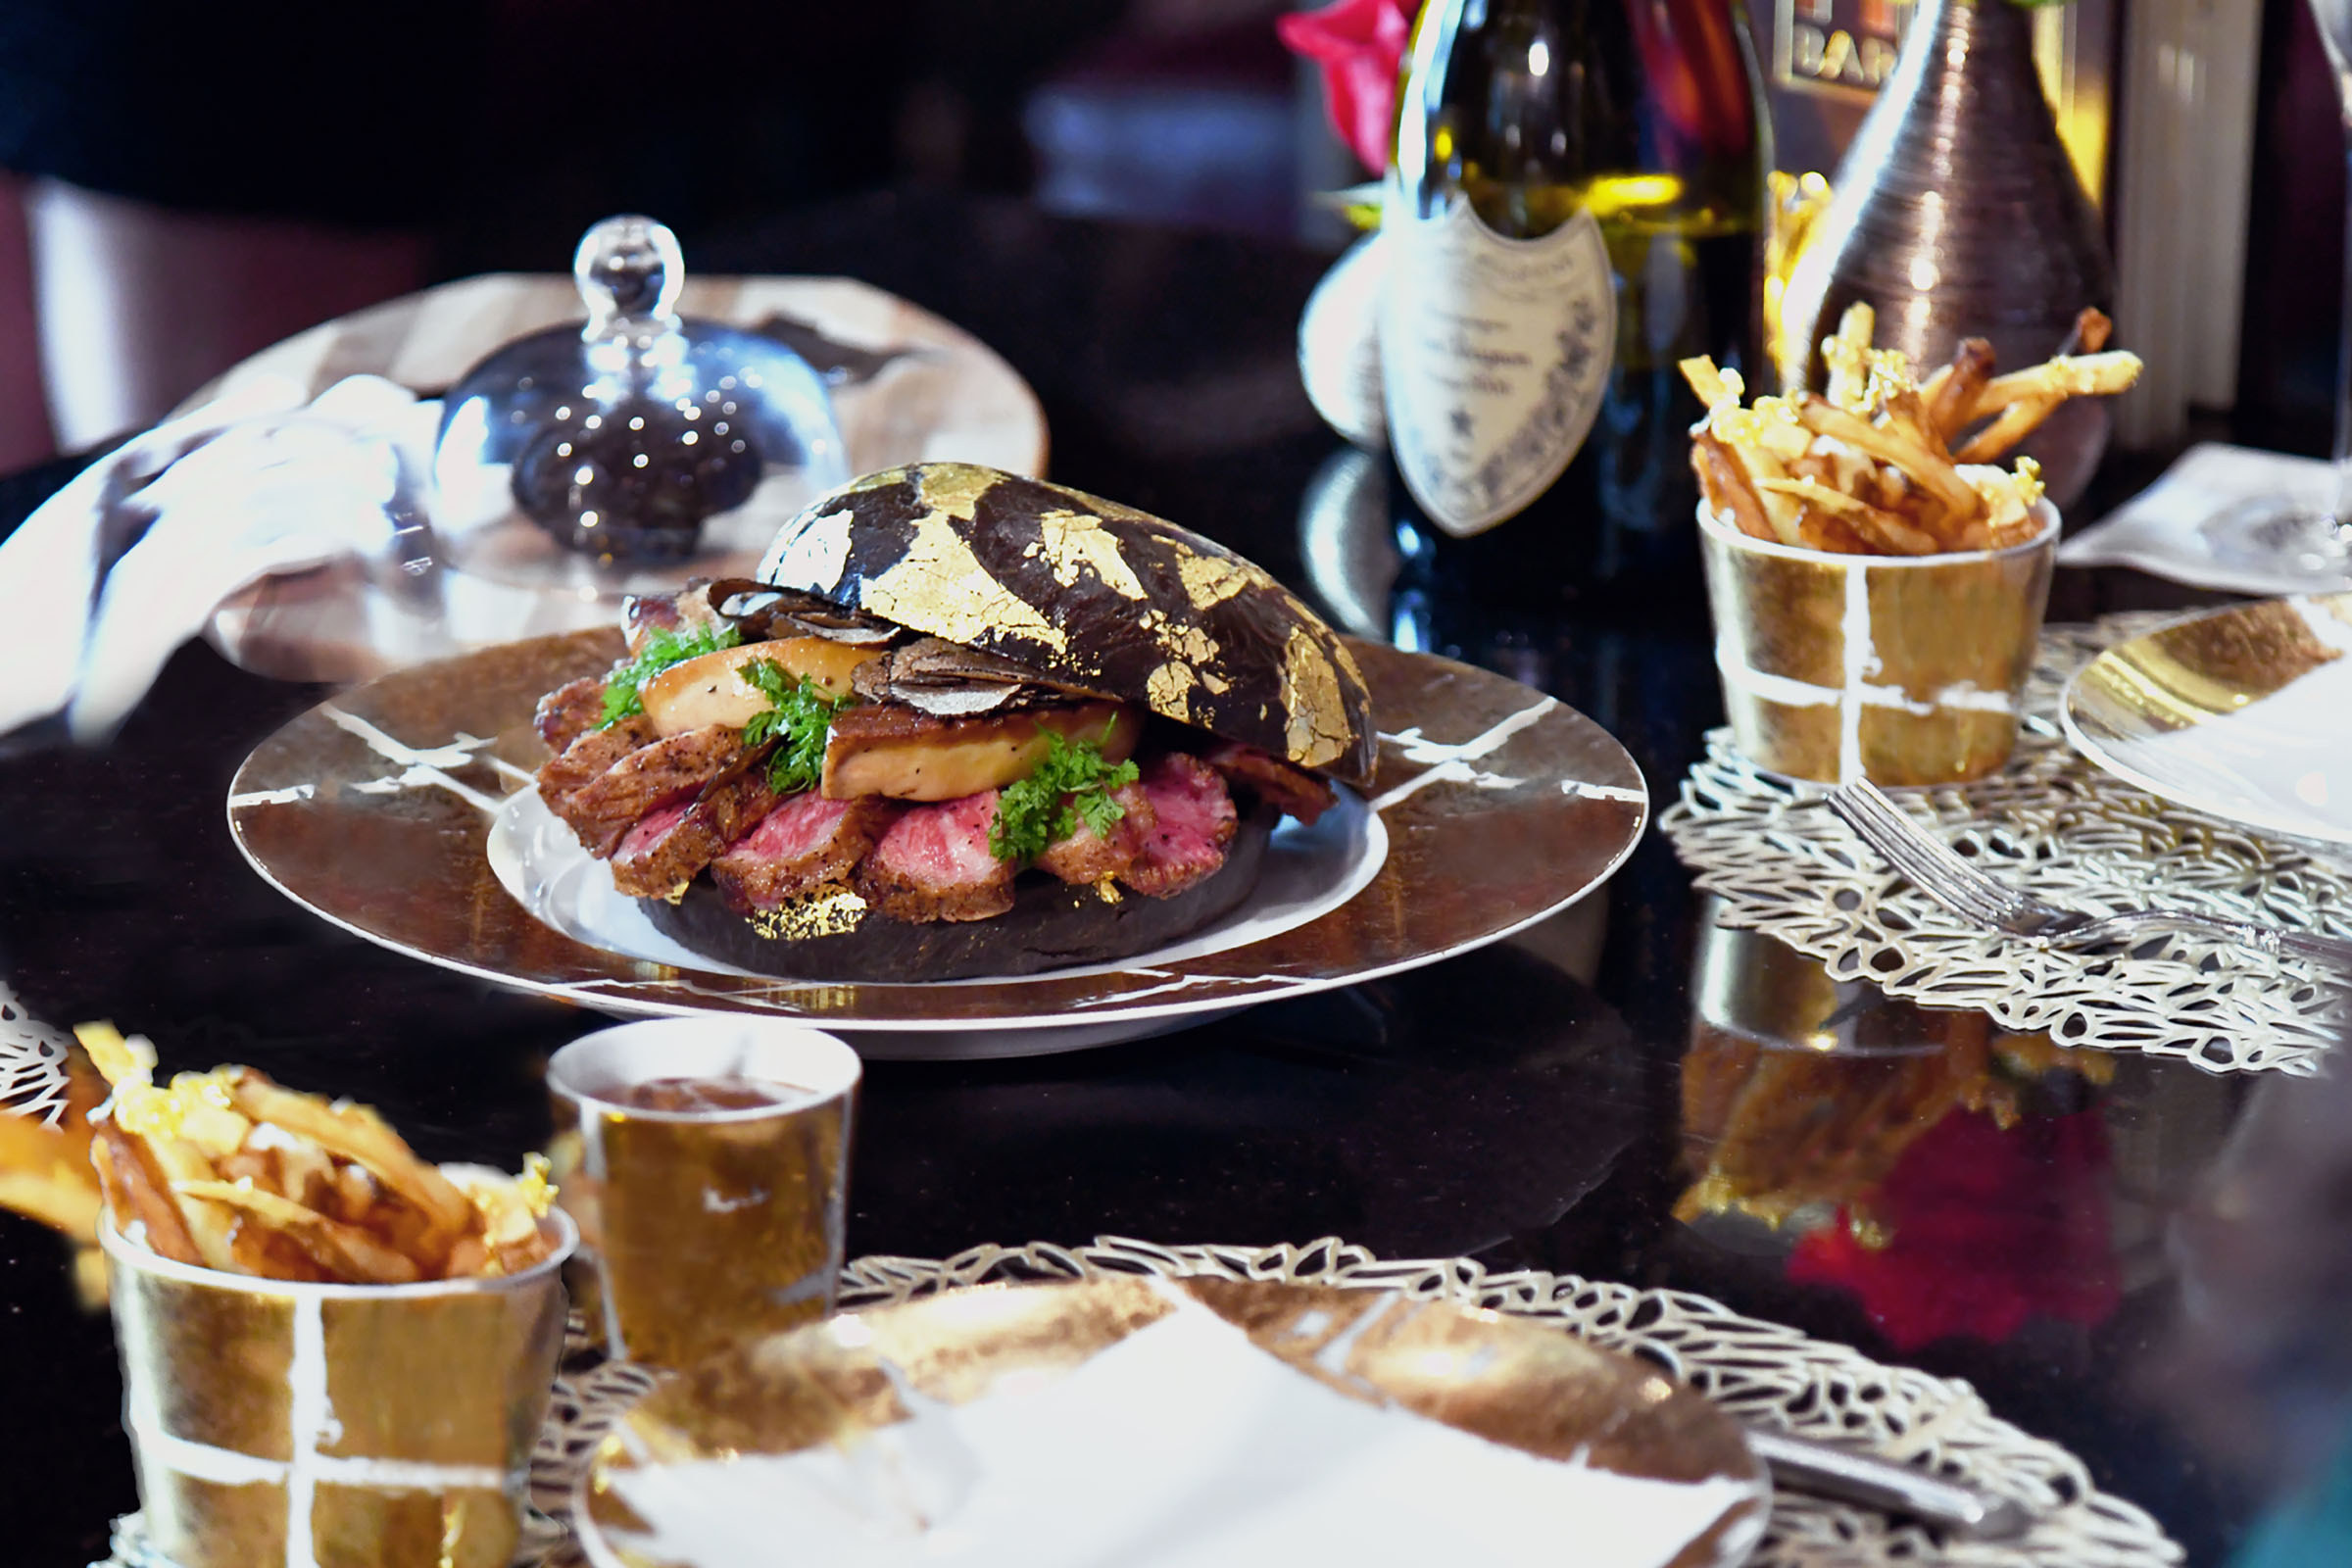 A gold leaf-crusted burger with a bottle of champagne and other luxurious sides